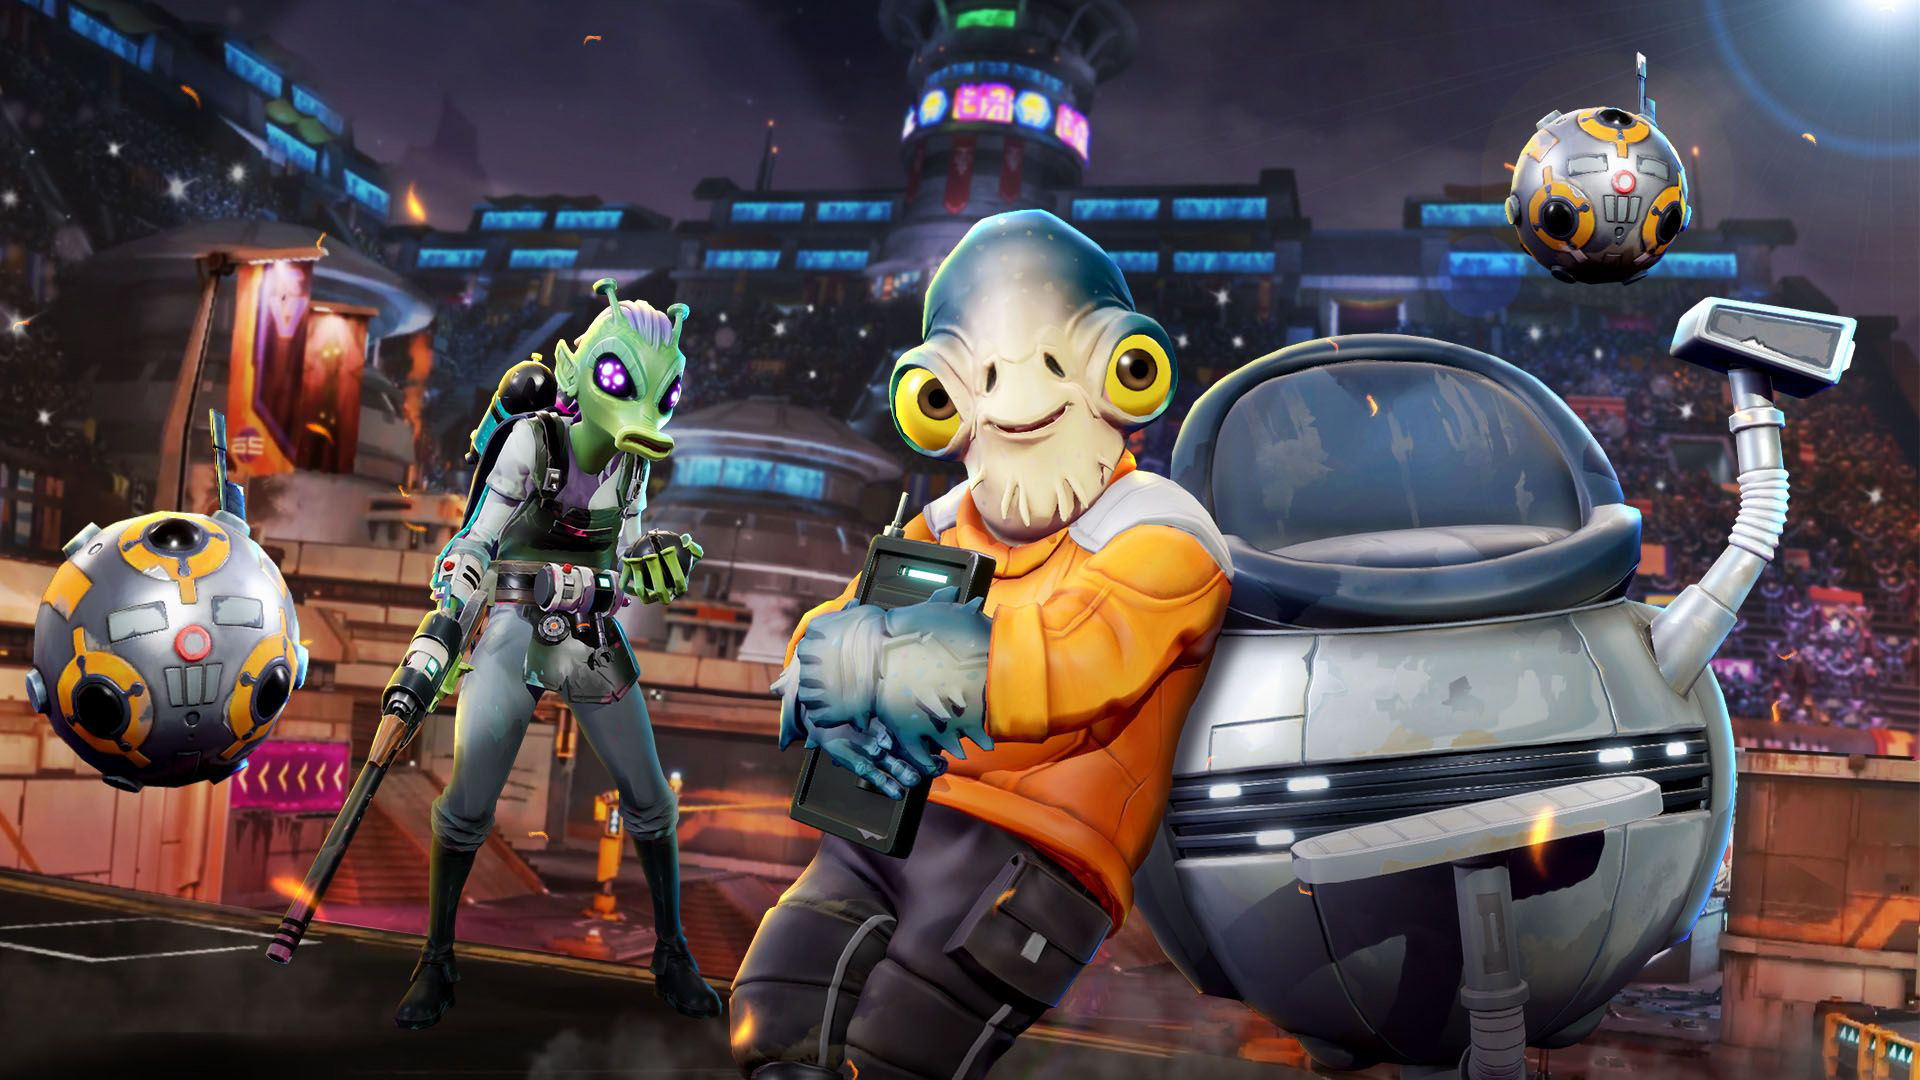 Plants vs. Zombies 2 hits Android worldwide - GameSpot